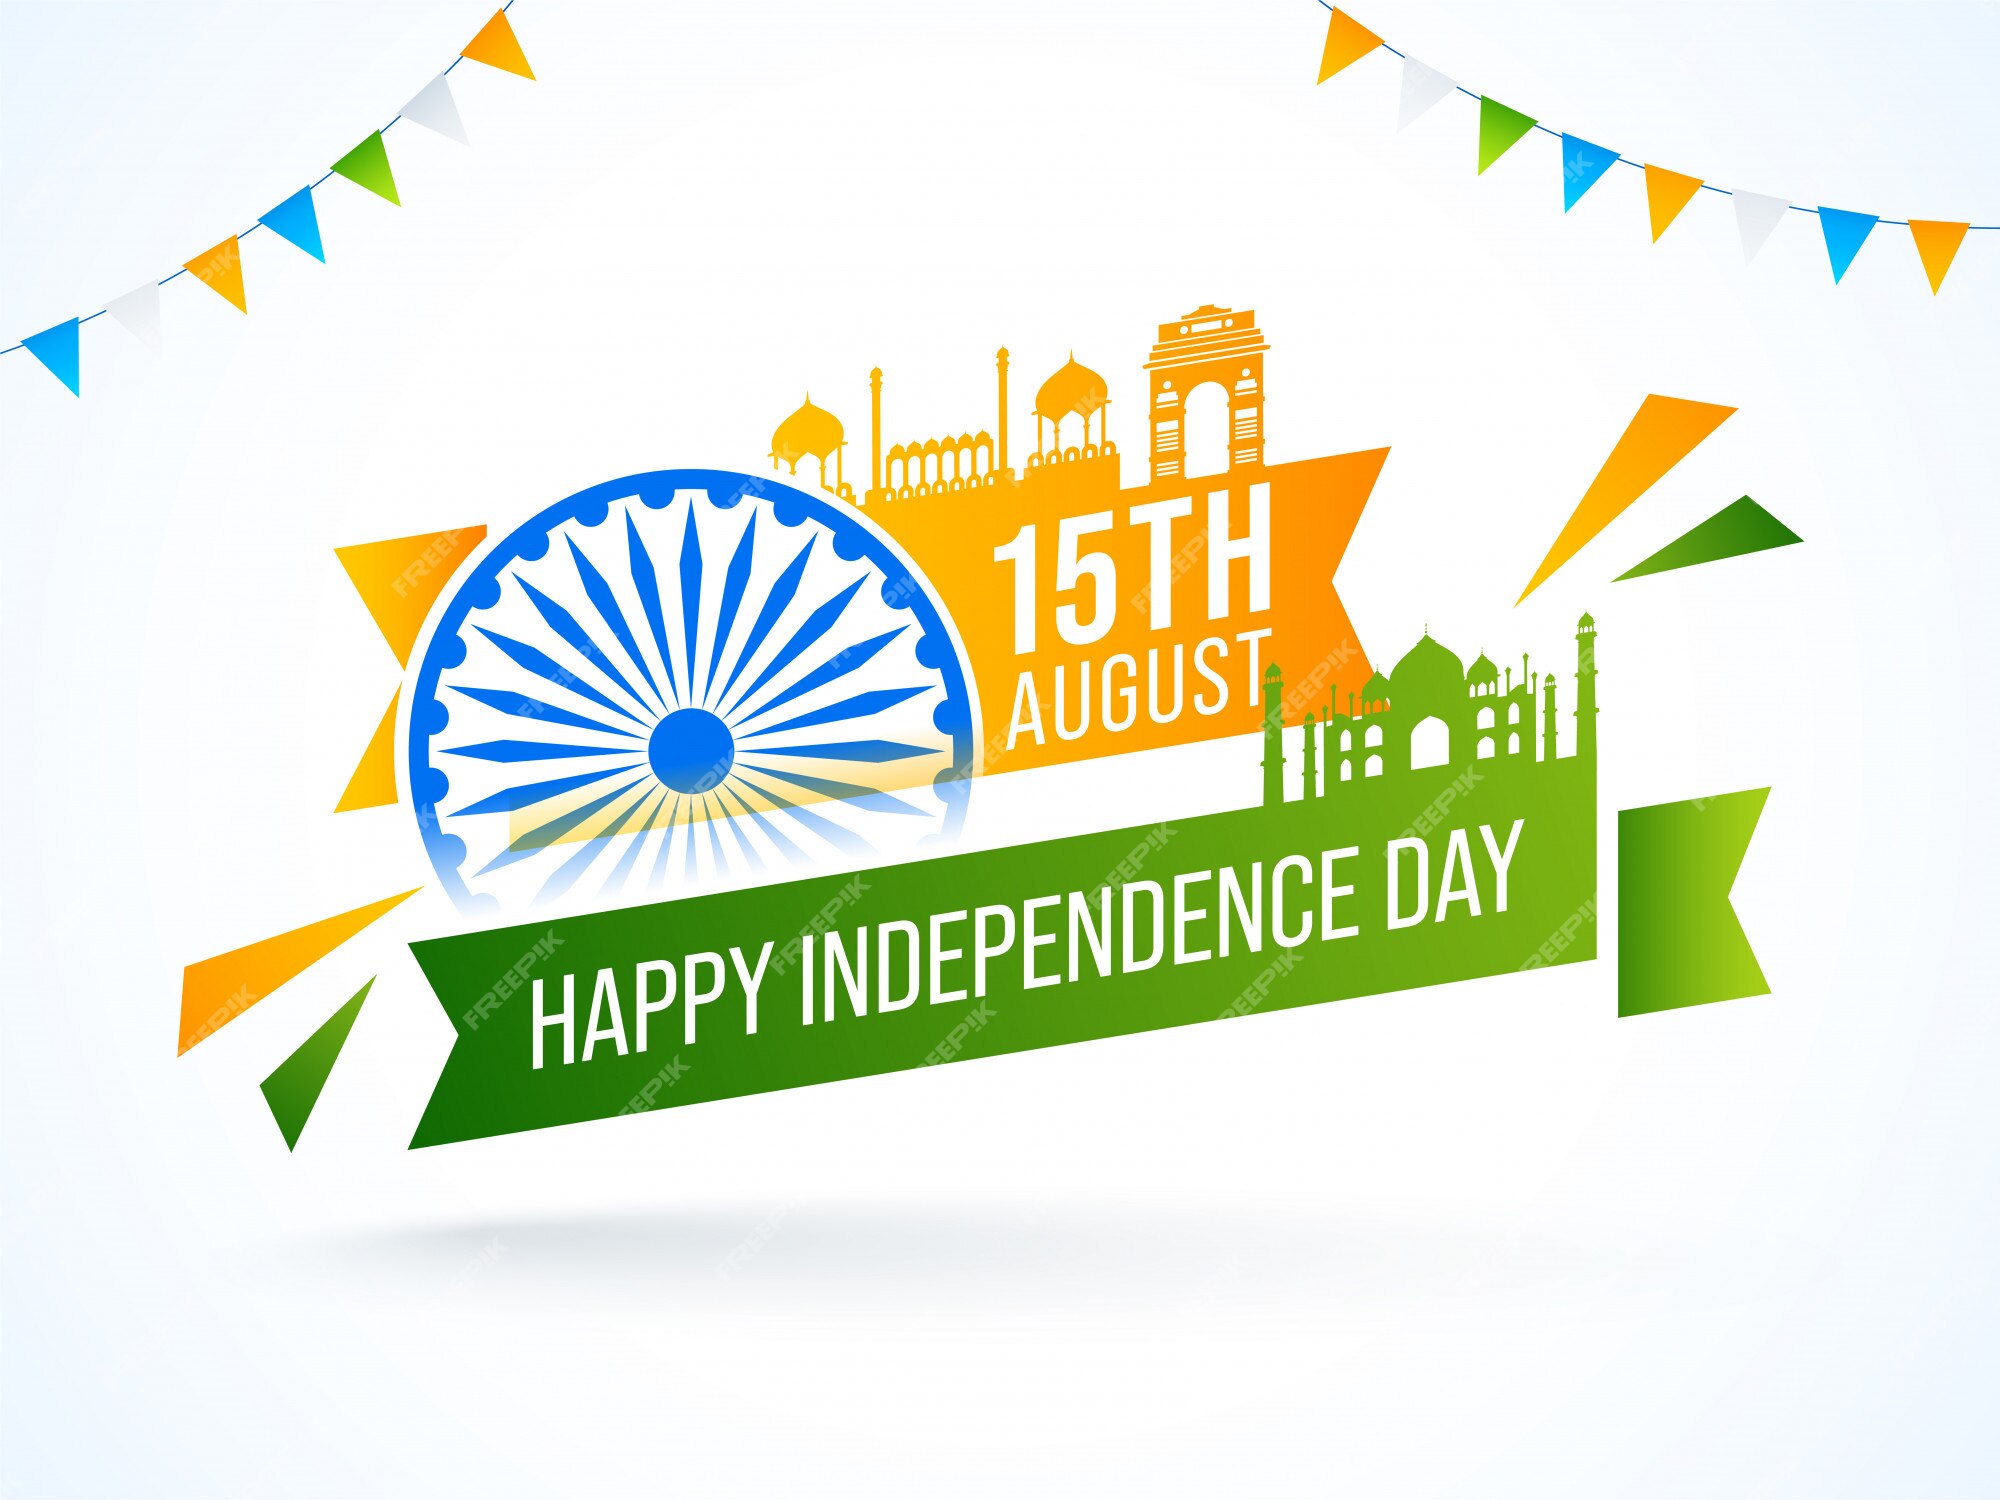 Premium Vector | , happy independence day text with ashoka wheel, famous  monuments of india and bunting flags decorated on white background.